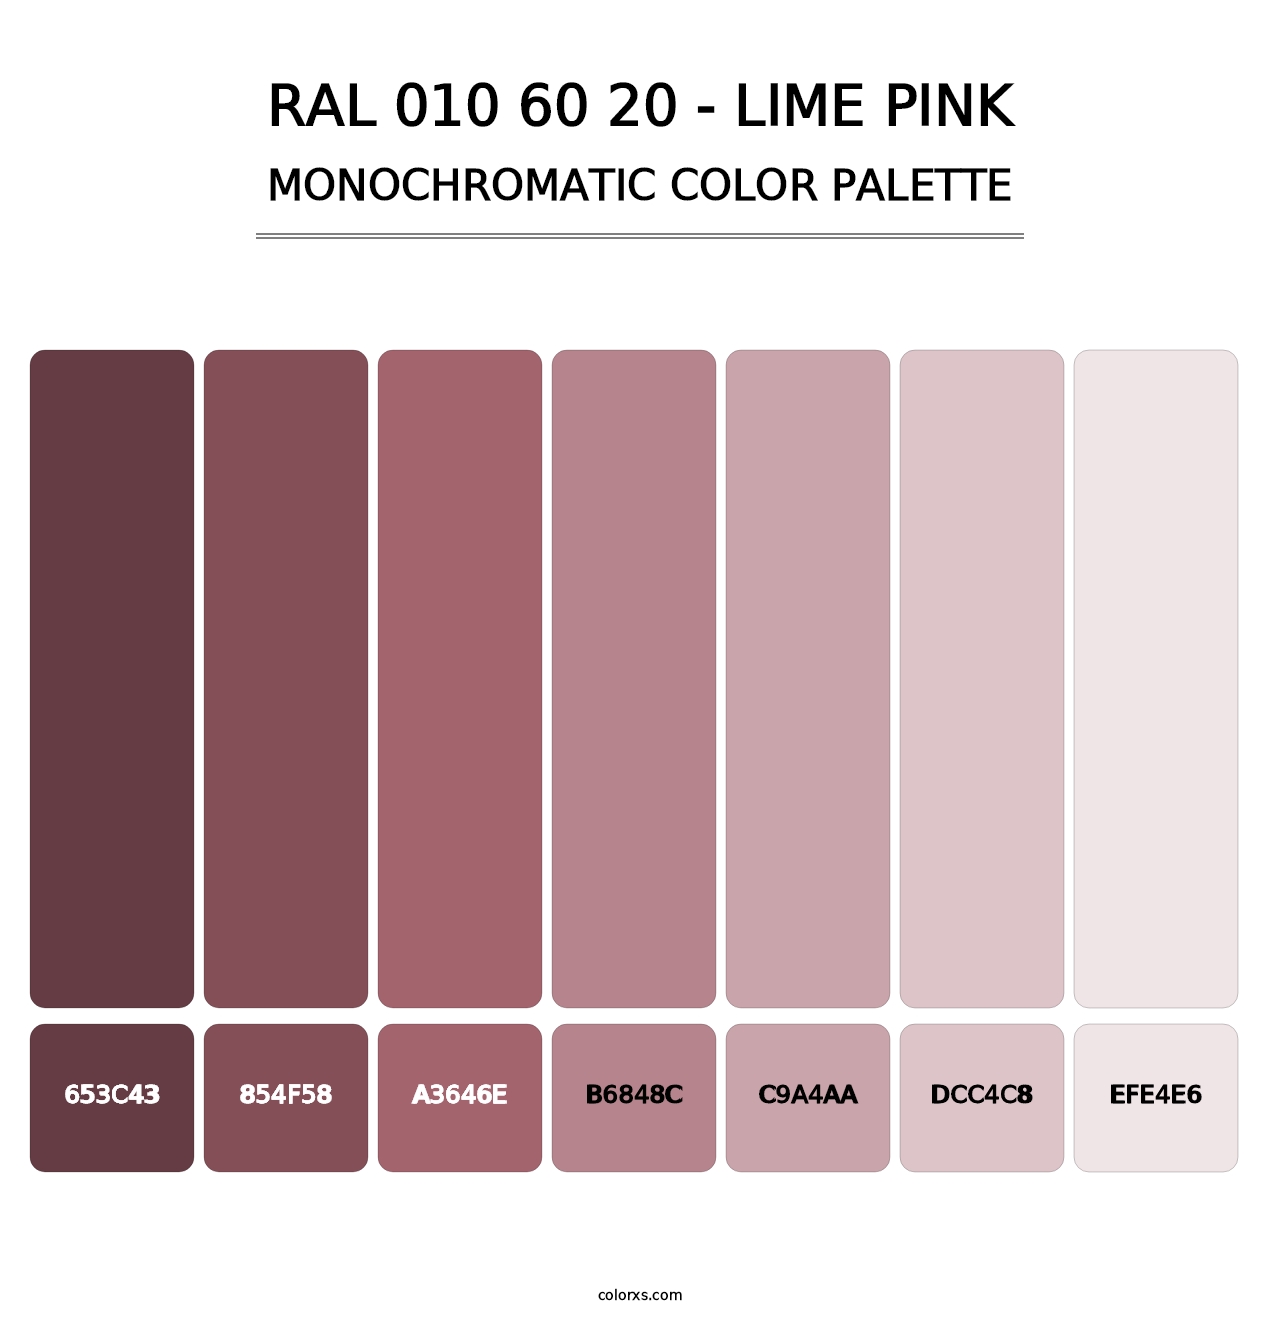 RAL 010 60 20 - Lime Pink - Monochromatic Color Palette